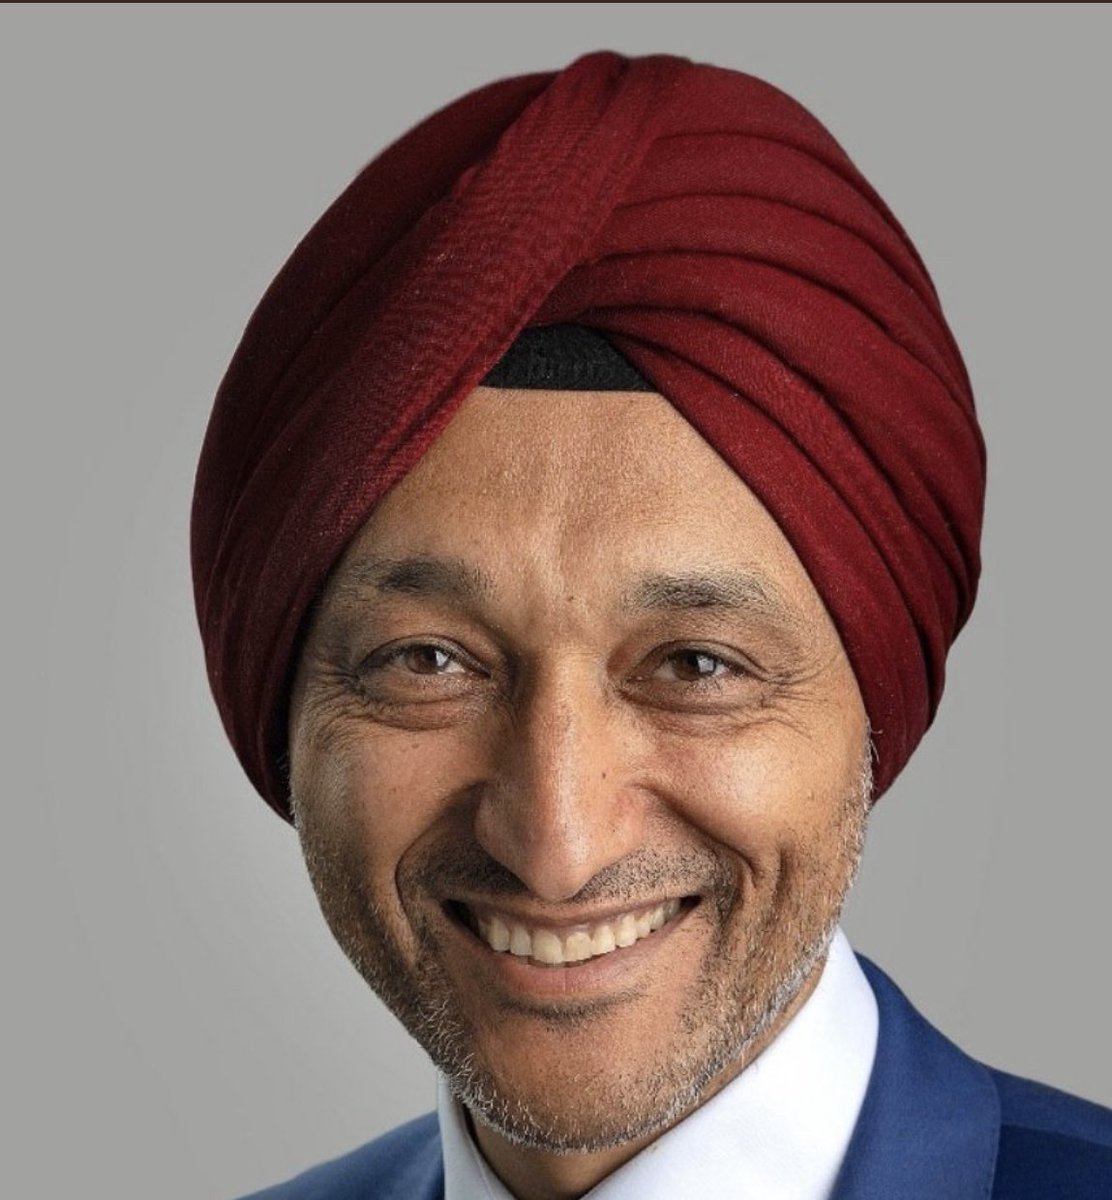 Our Commissioner, Parminder Kohli will be part of a panel discussion on 'Developing Skills and Talent: Social Mobility and Post-16 Education' in partnership with Policy Connect. 

🗓️ Tuesday, 21 May 2024
🕦 1.30pm - 3pm

Book your place now: …ialmobility.independent-commission.uk/events/social-…